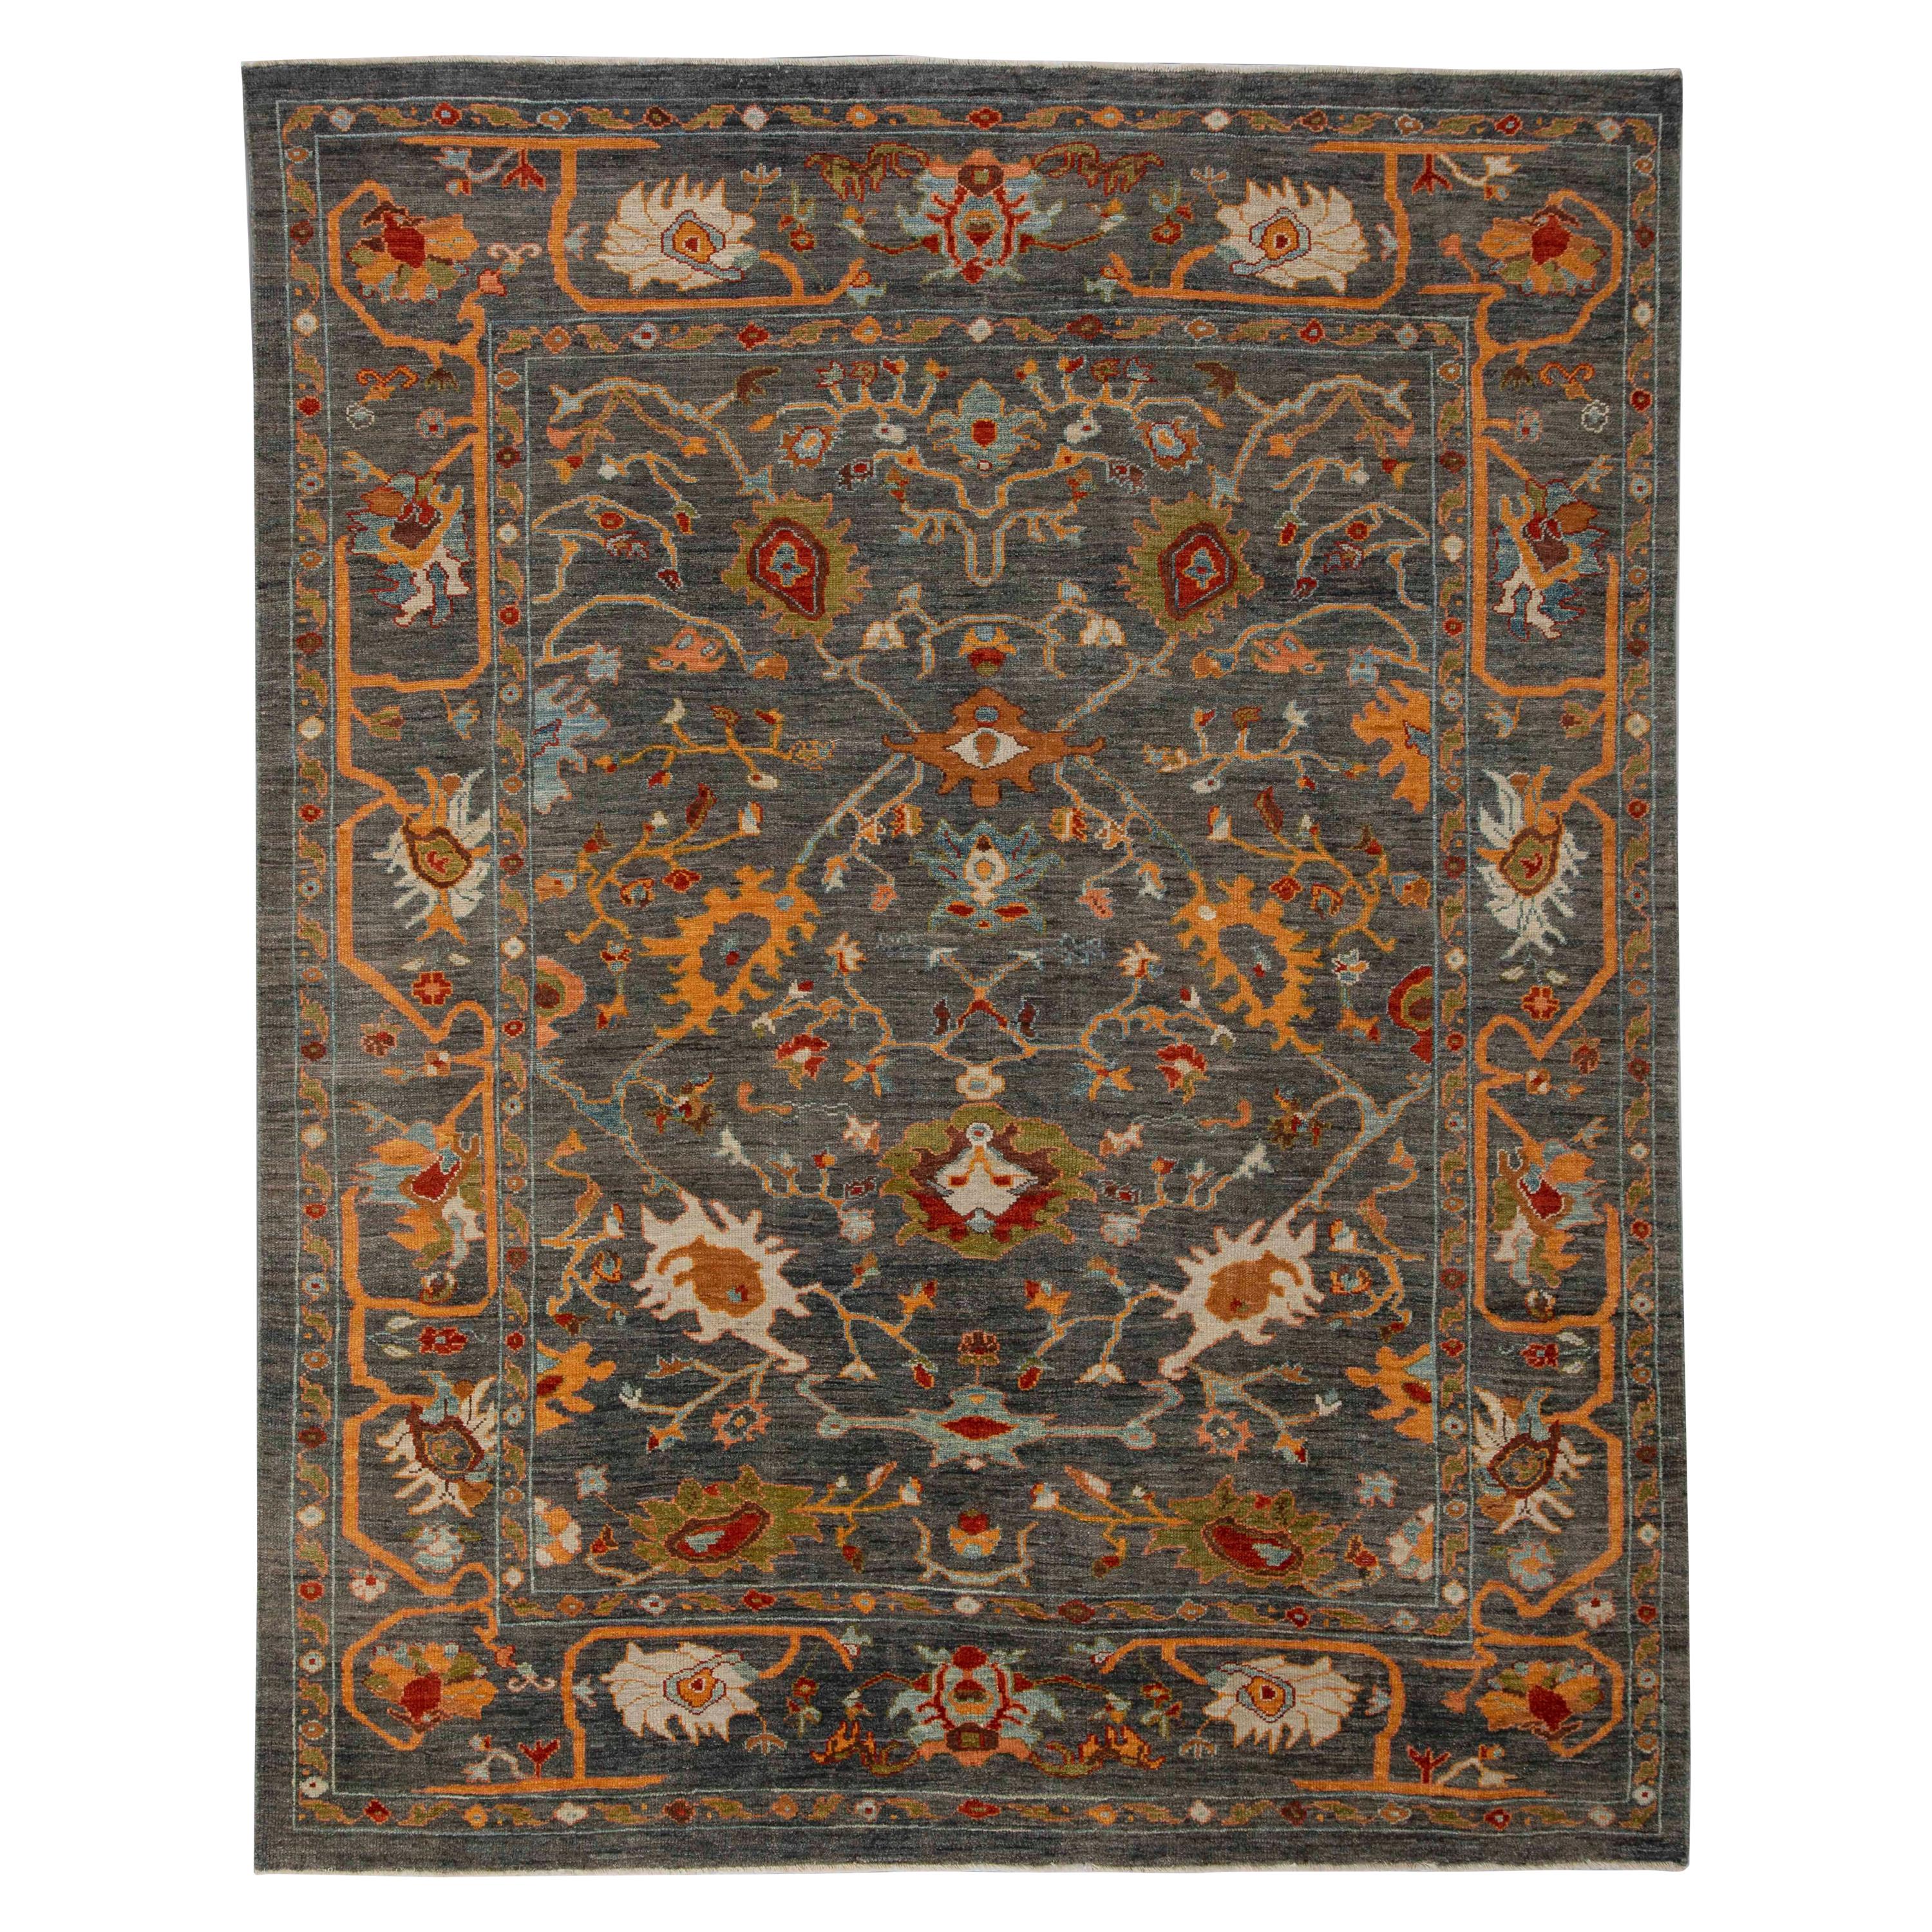 Contemporary Turkish Sultanabad Rug with Gray Field and Colored Floral Patterns